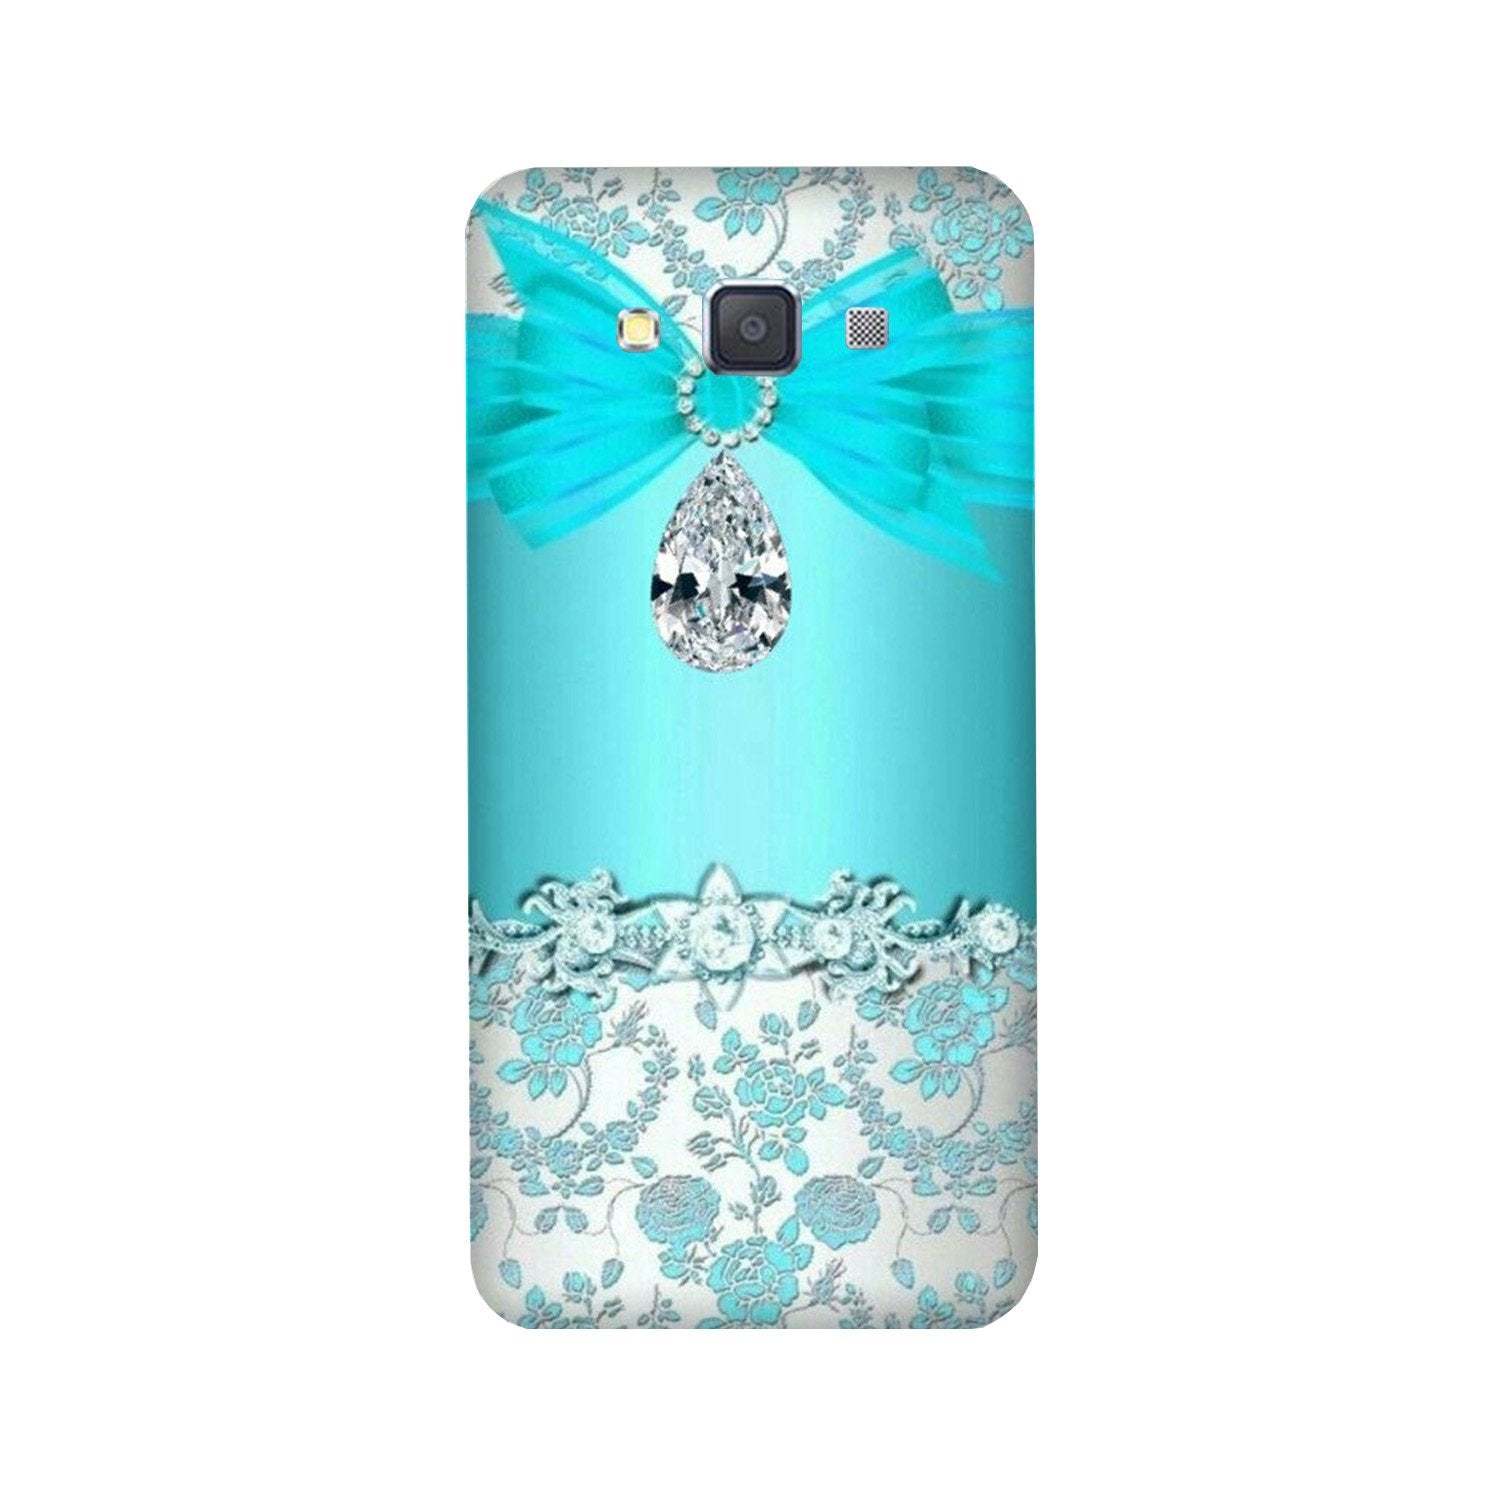 Shinny Blue Background Case for Galaxy A3 (2015)